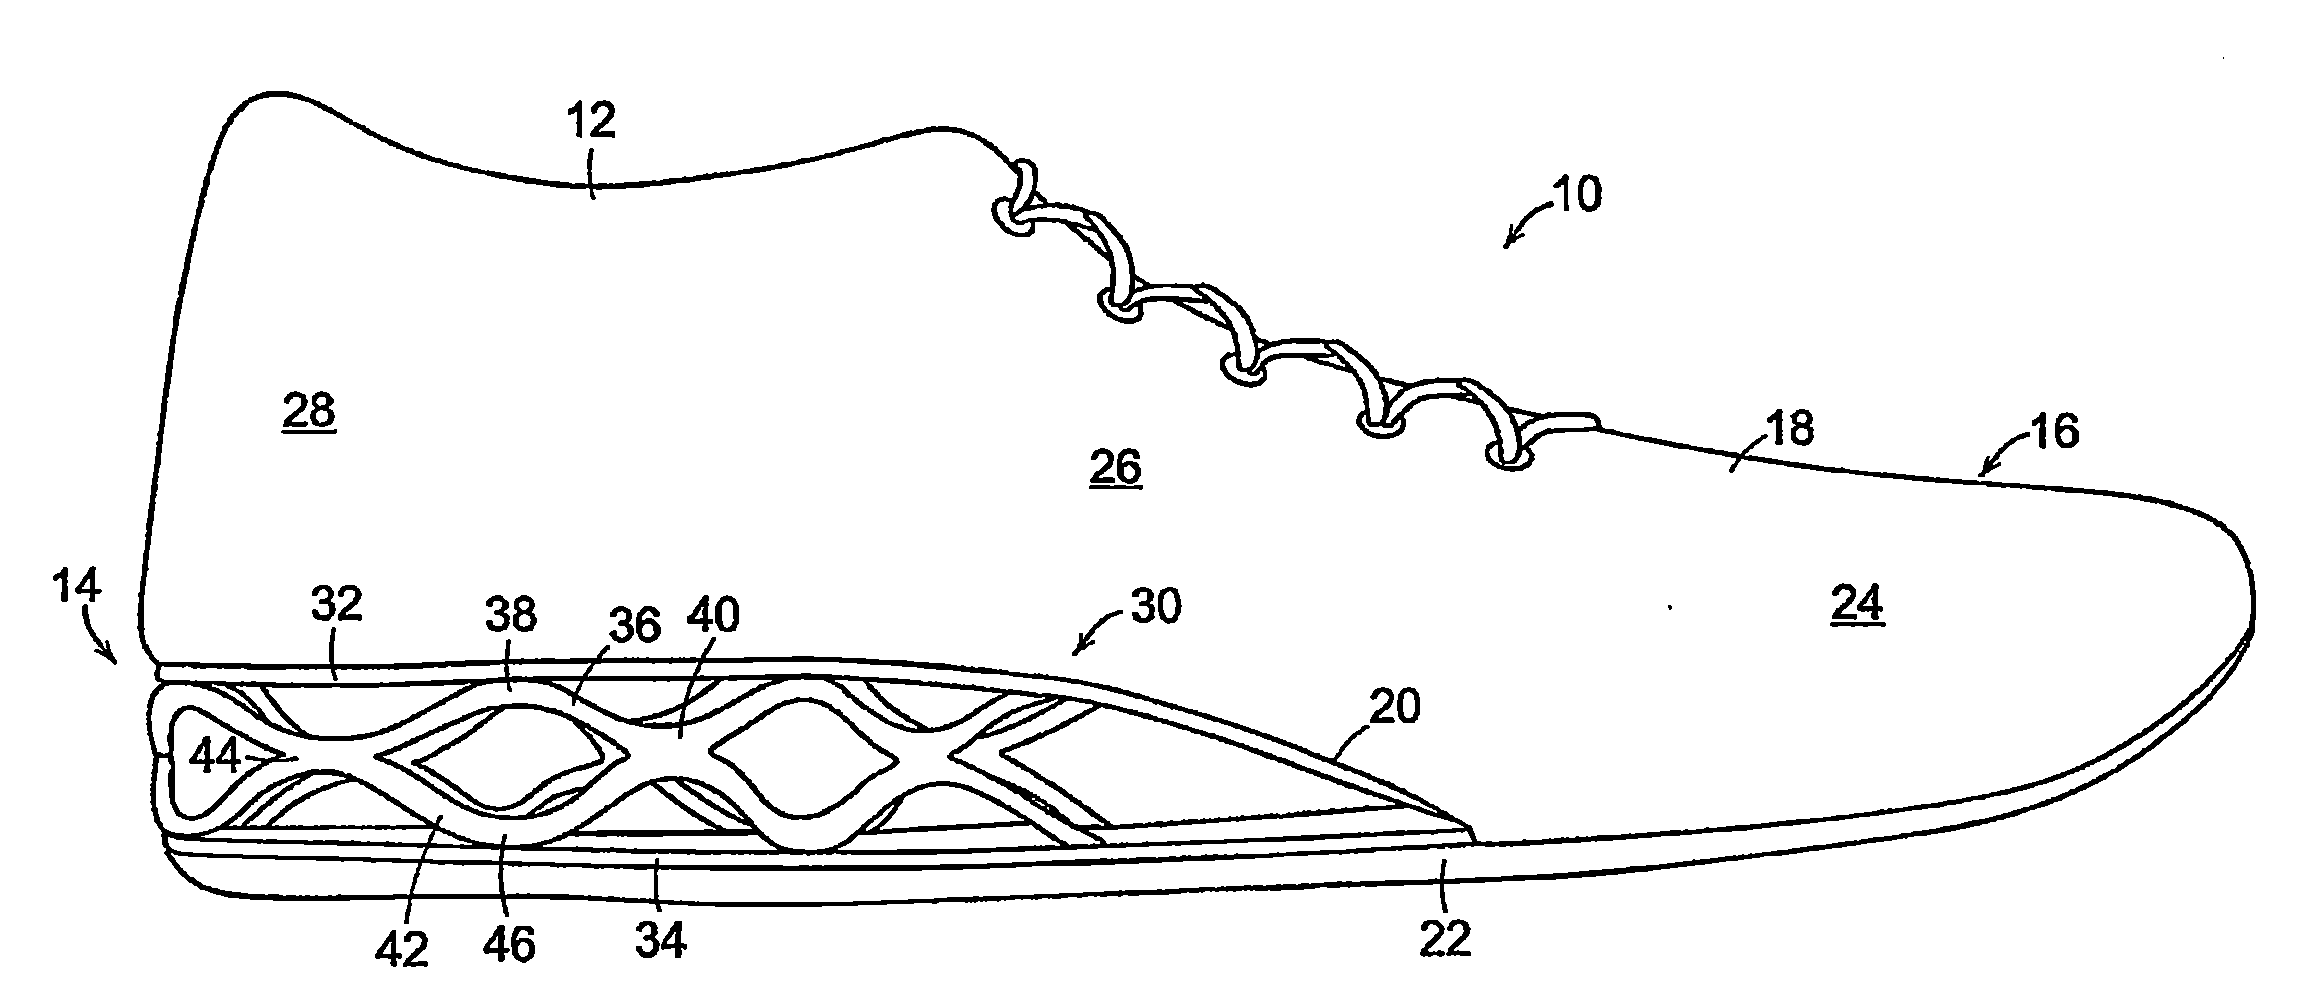 Article of Footwear with Multi-Layered Support Assembly